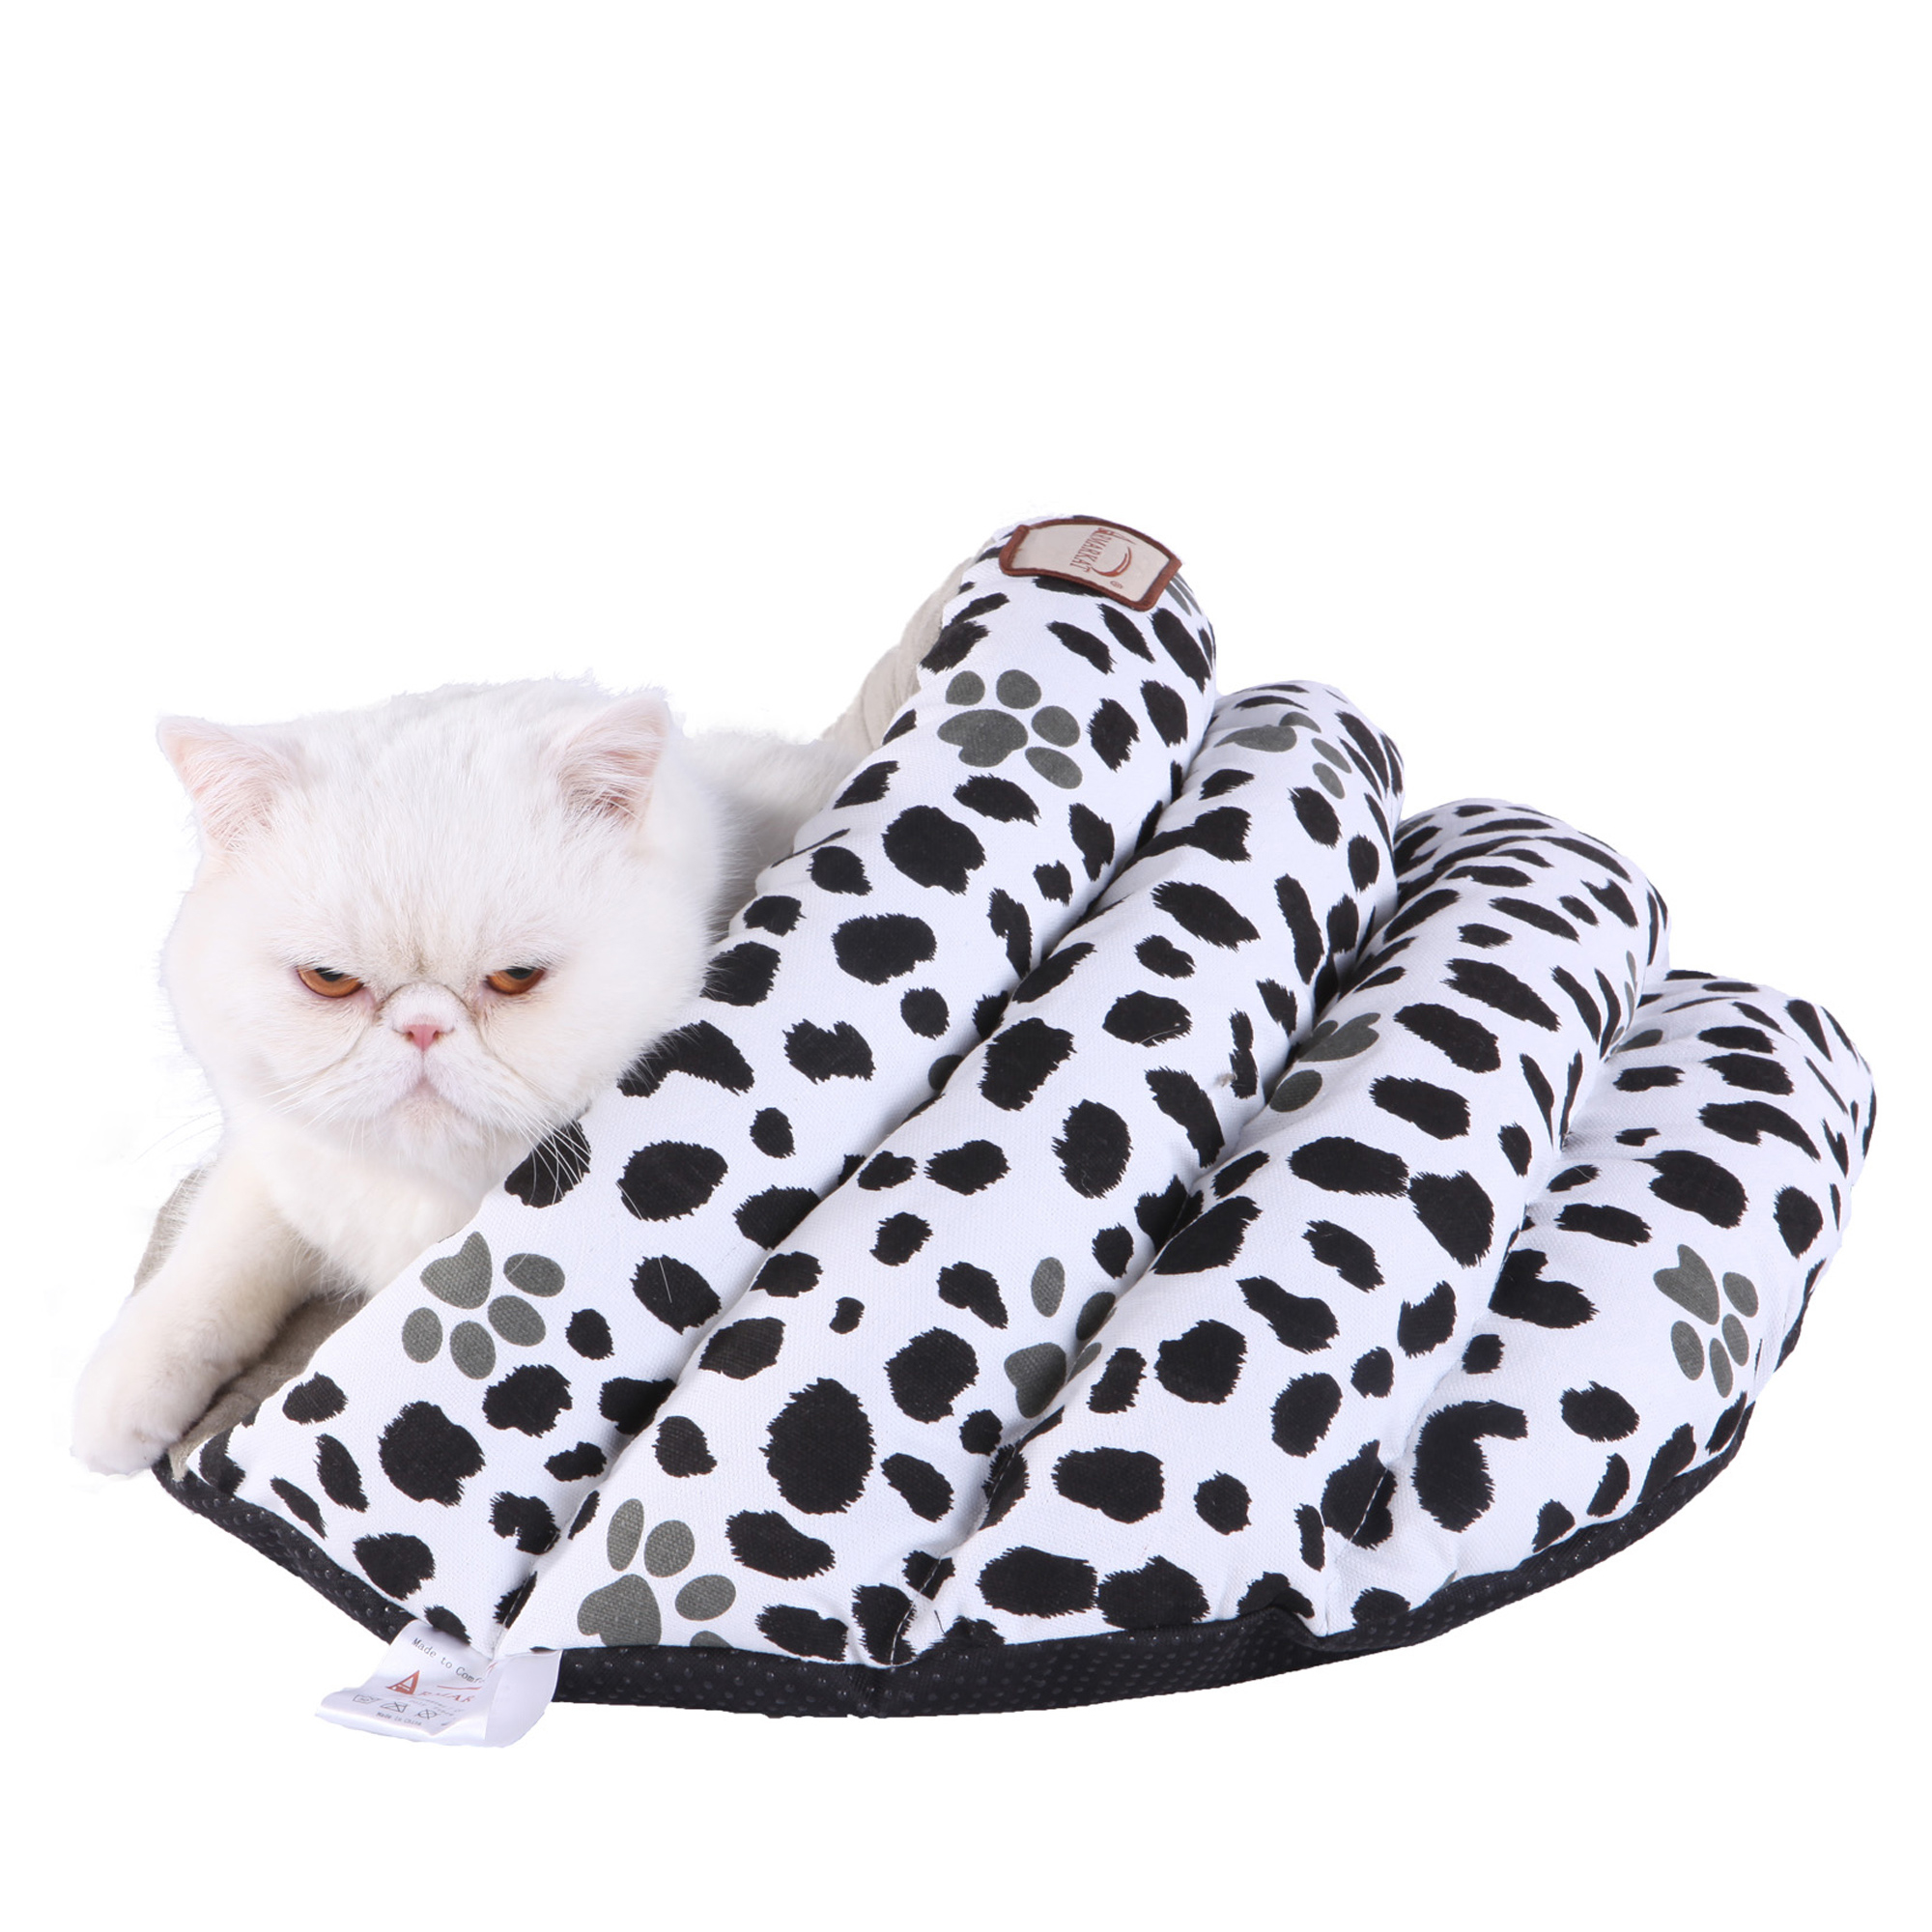 Picture of Aeromark C19HZY-HL Armarkat Pet Bed Cat Bed 20 x 11 x 20 - Sage Green & Pawprint